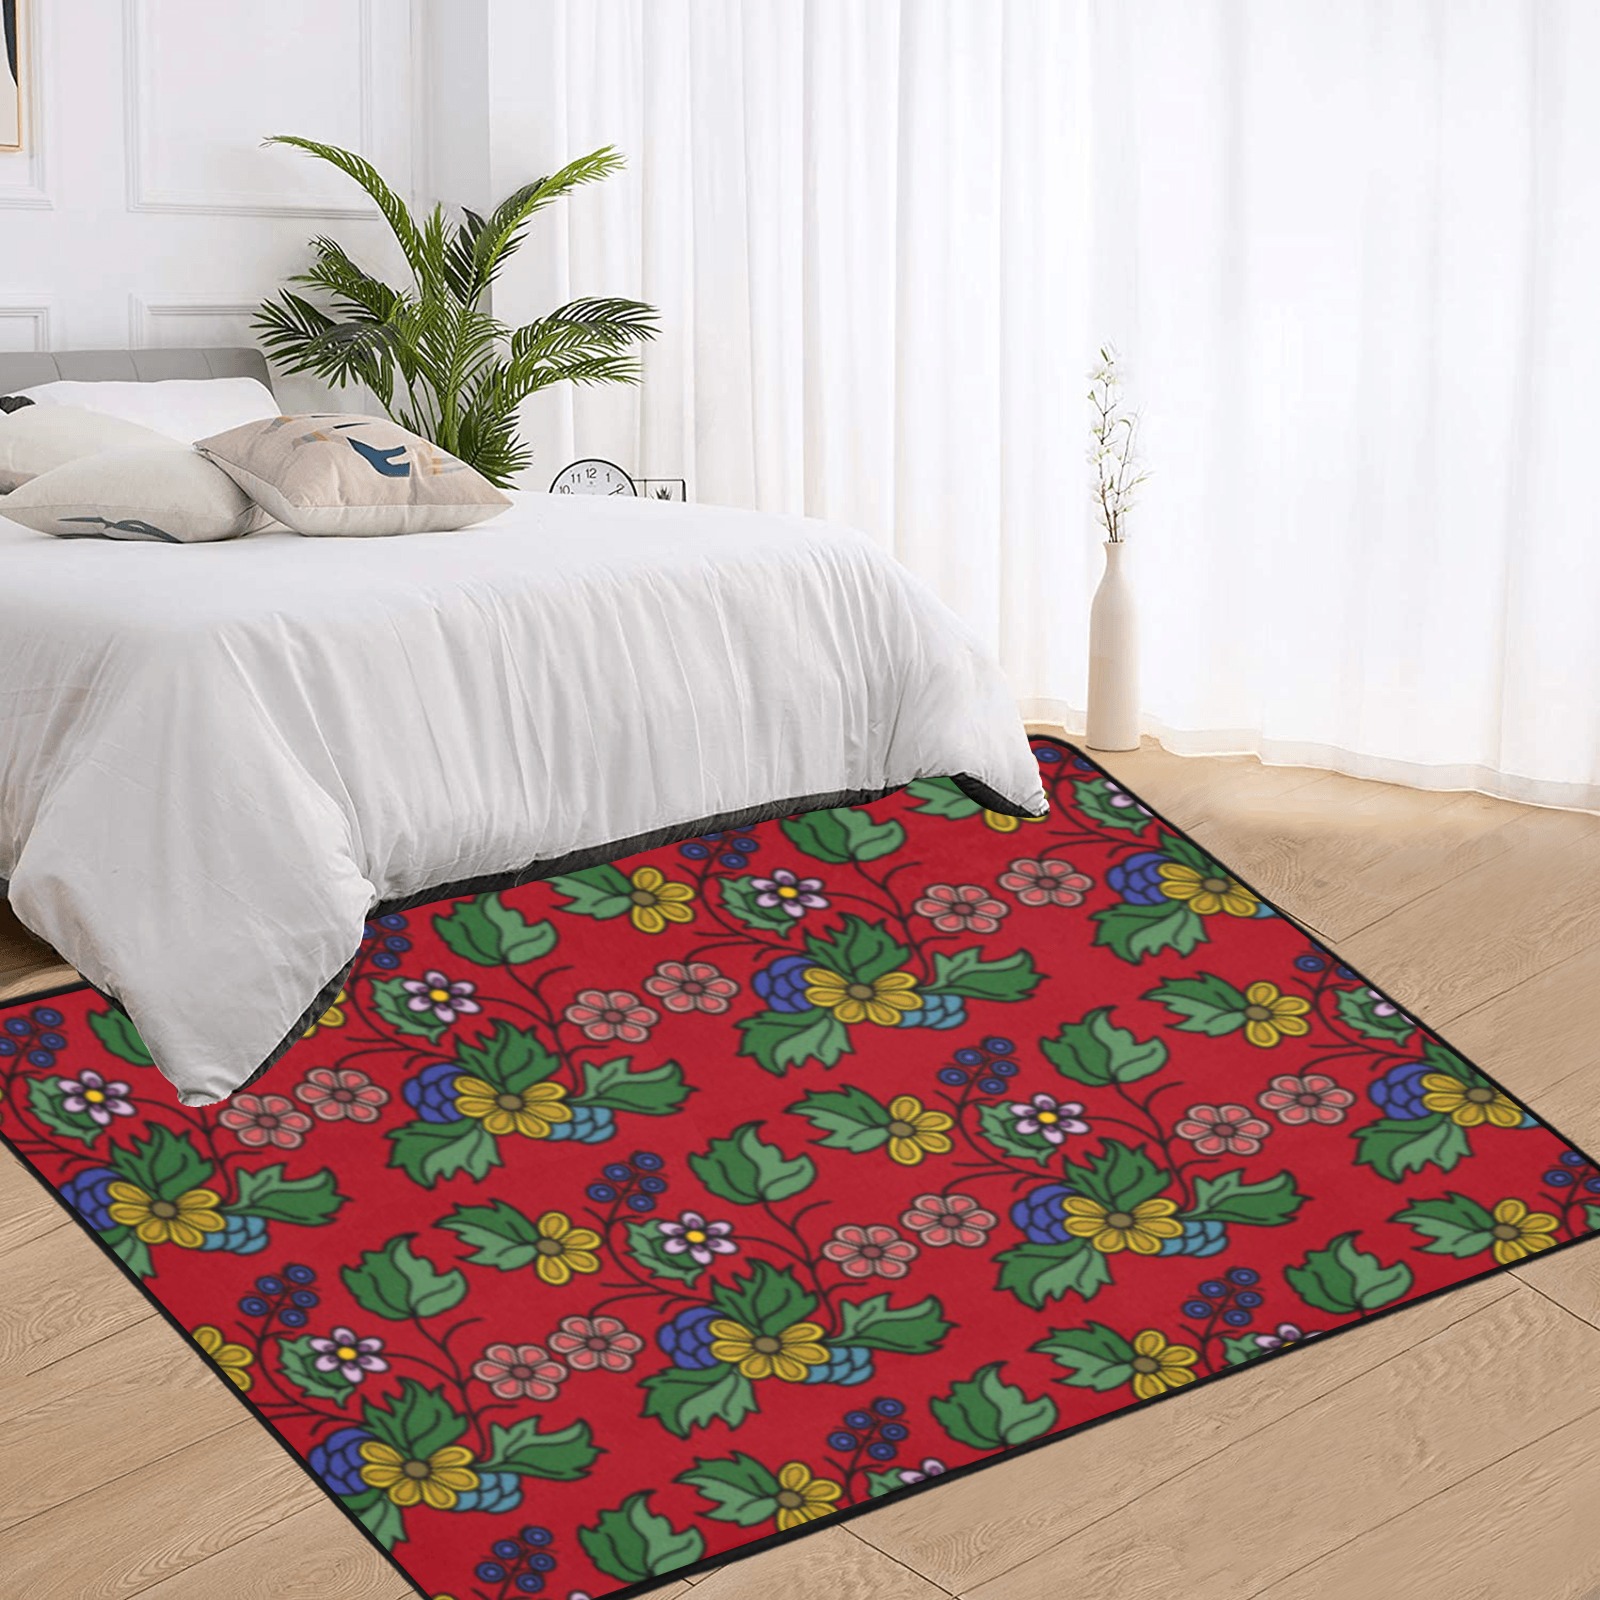 red floral Area Rug with Black Binding 7'x5'